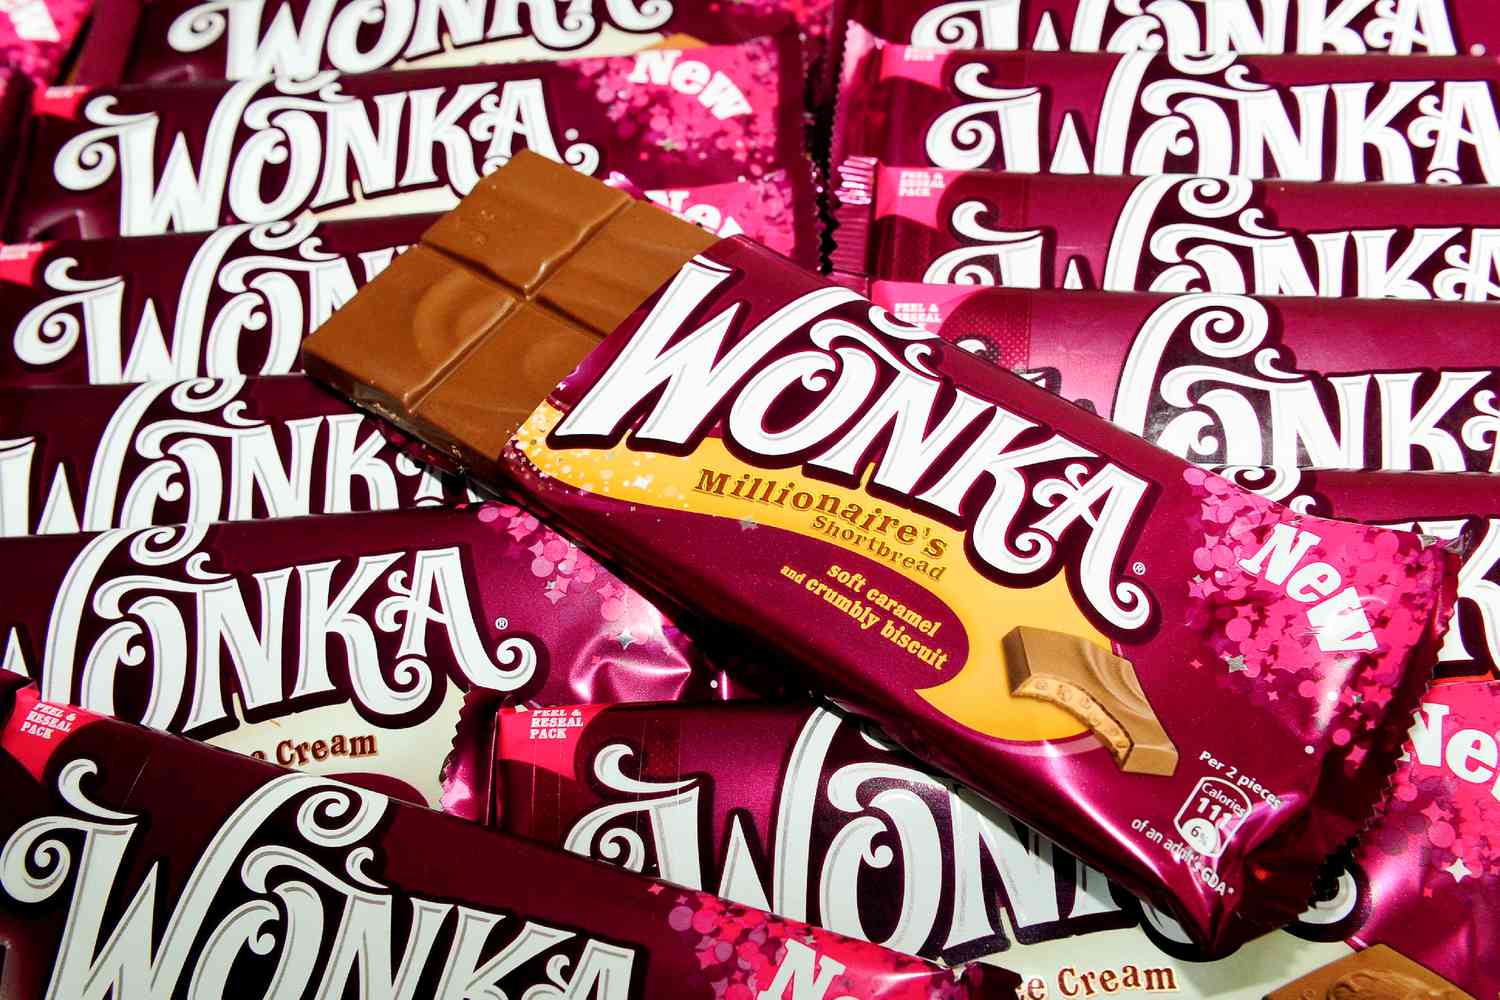 Have you had a taste of a Wonka Bar?